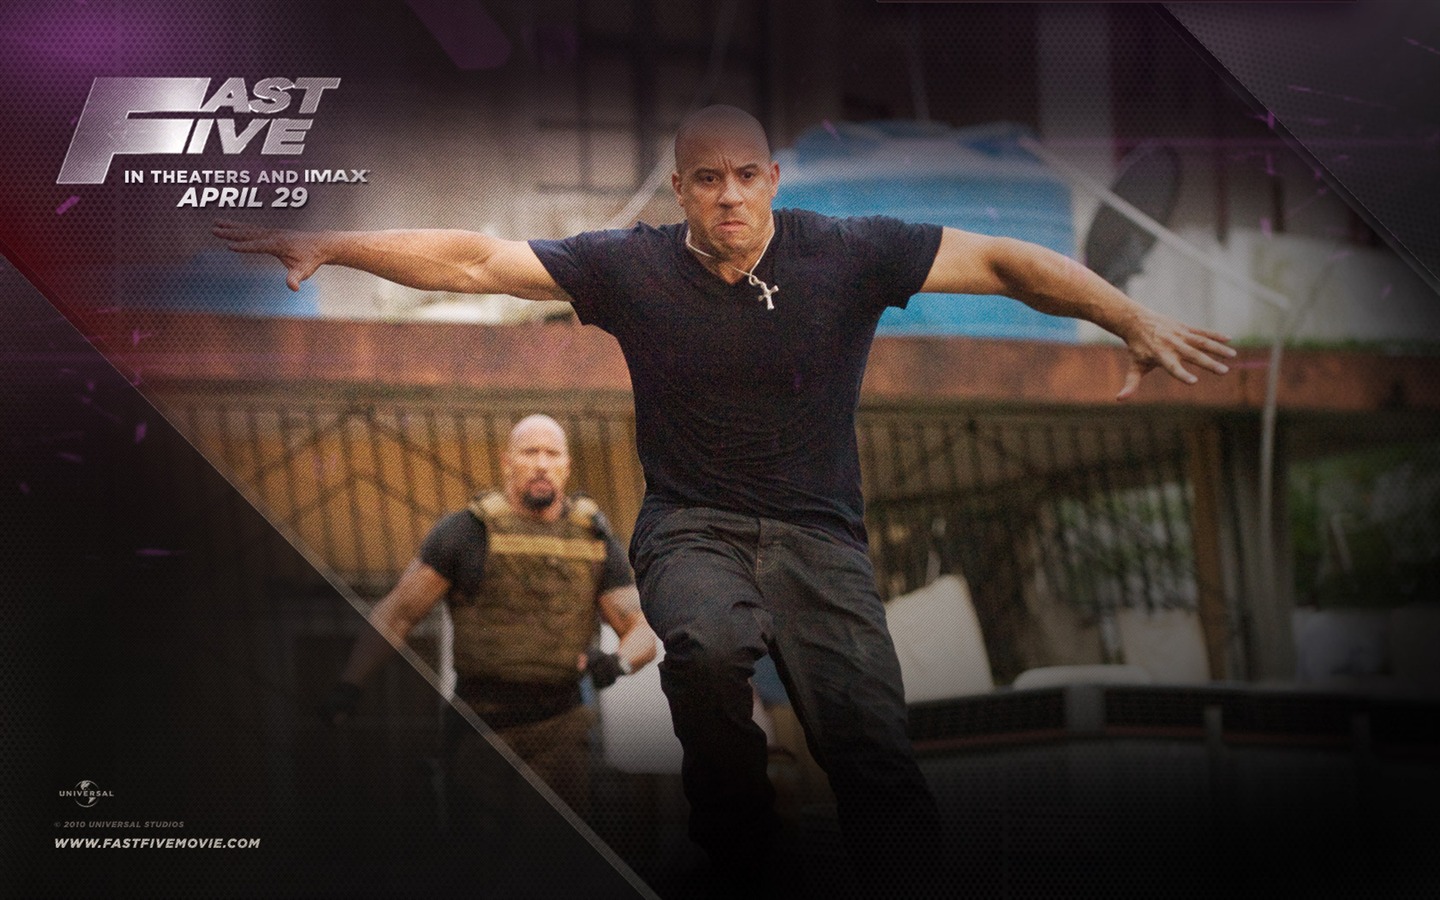 Fast Five wallpapers #5 - 1440x900